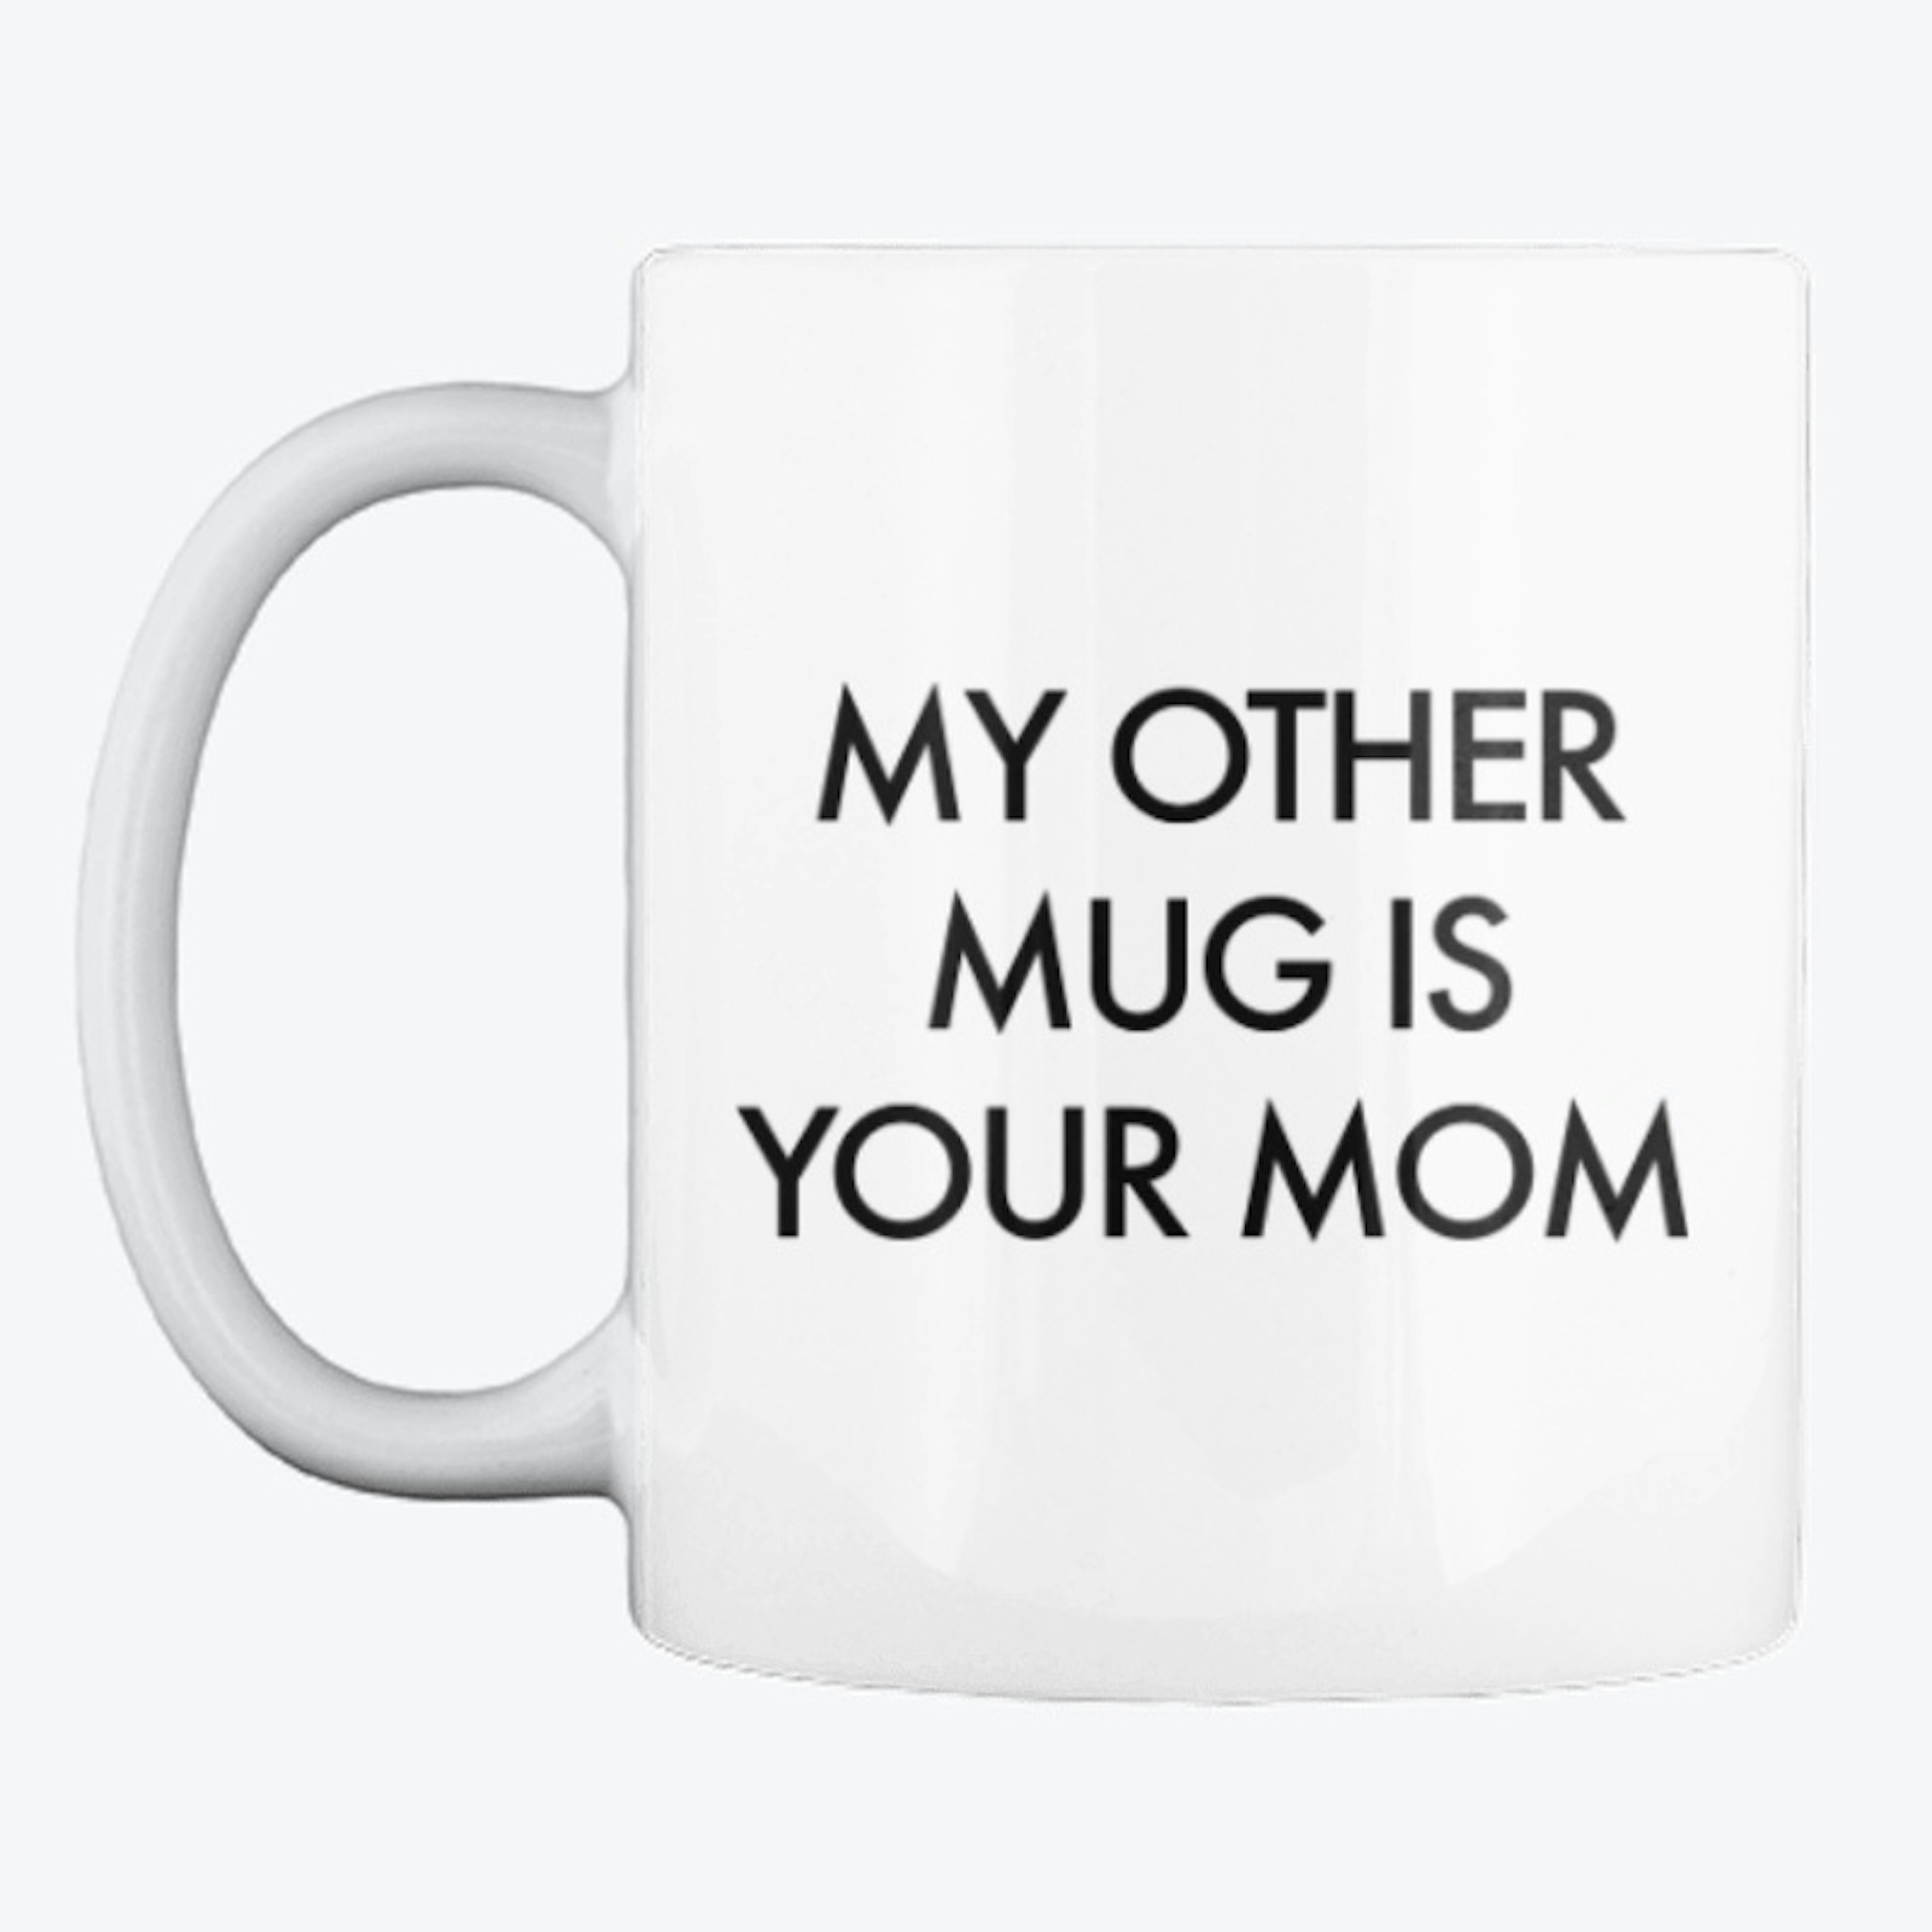 My Other Mug is Your Mom